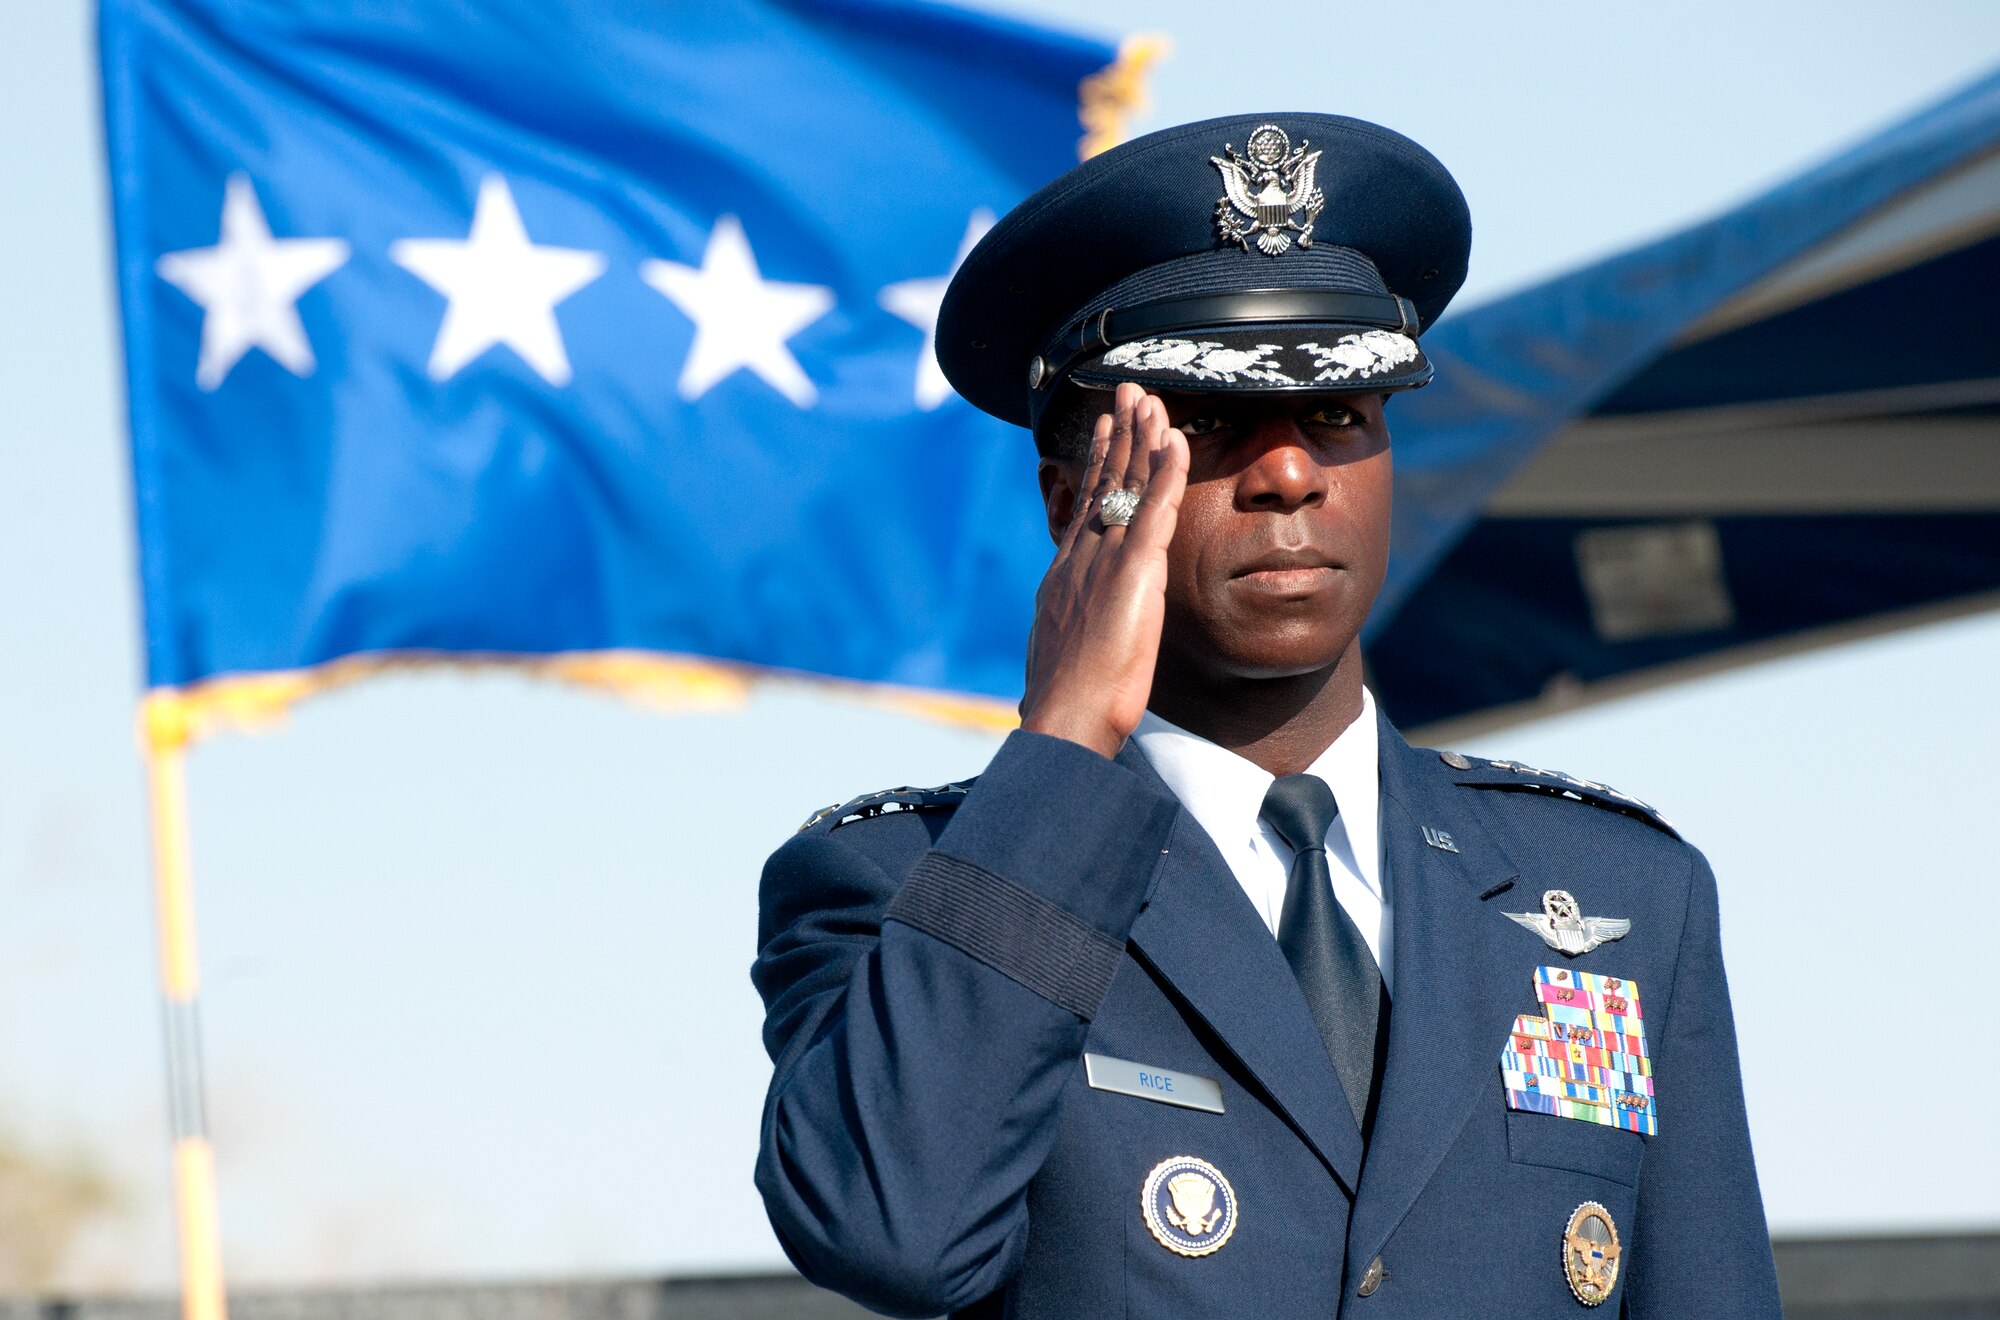 ALTUS AIR FORCE BASE, Okla. -- Gen. Edward A. Rice Jr., commander of Air Education and Training Command, salutes the members of Altus AFB during the 97th Air Mobility Wing change of command ceremony, at Wings of Freedom Park, June 27. Gen. Rice served as the reviewing officer as Col. Anthony B. Krawietz, 97th AMW commander relinquished command to Col. William A. Spangenthal. Rice is responsible for the recruiting, training and educating Air Force personnel. His command includes the Air Force Recruiting Service, a numbered air force and Air University. AETC trains more than 293,000 students per year and consists of 12 bases, more than 67,900 active-duty, Reserve, Guard, civilians and contractors, and 1,369 trainer, fighter and mobility aircraft. (U.S. Air Force photo by Senior Airman Jesse Lopez / Released)